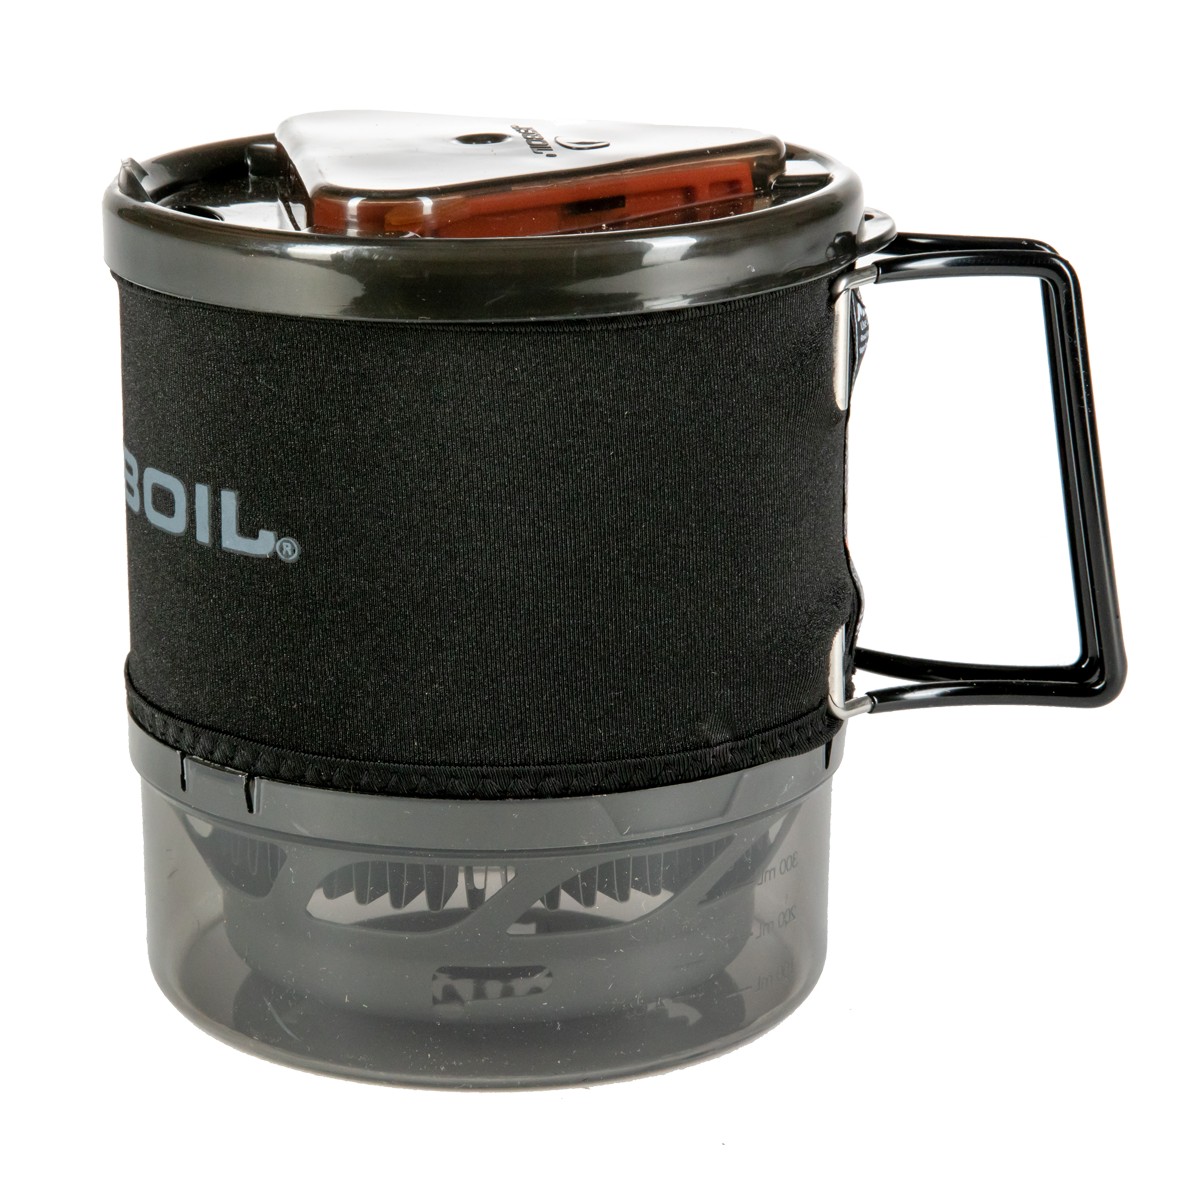 Jetboil MiniMo - Overland Outfitters - CANADA